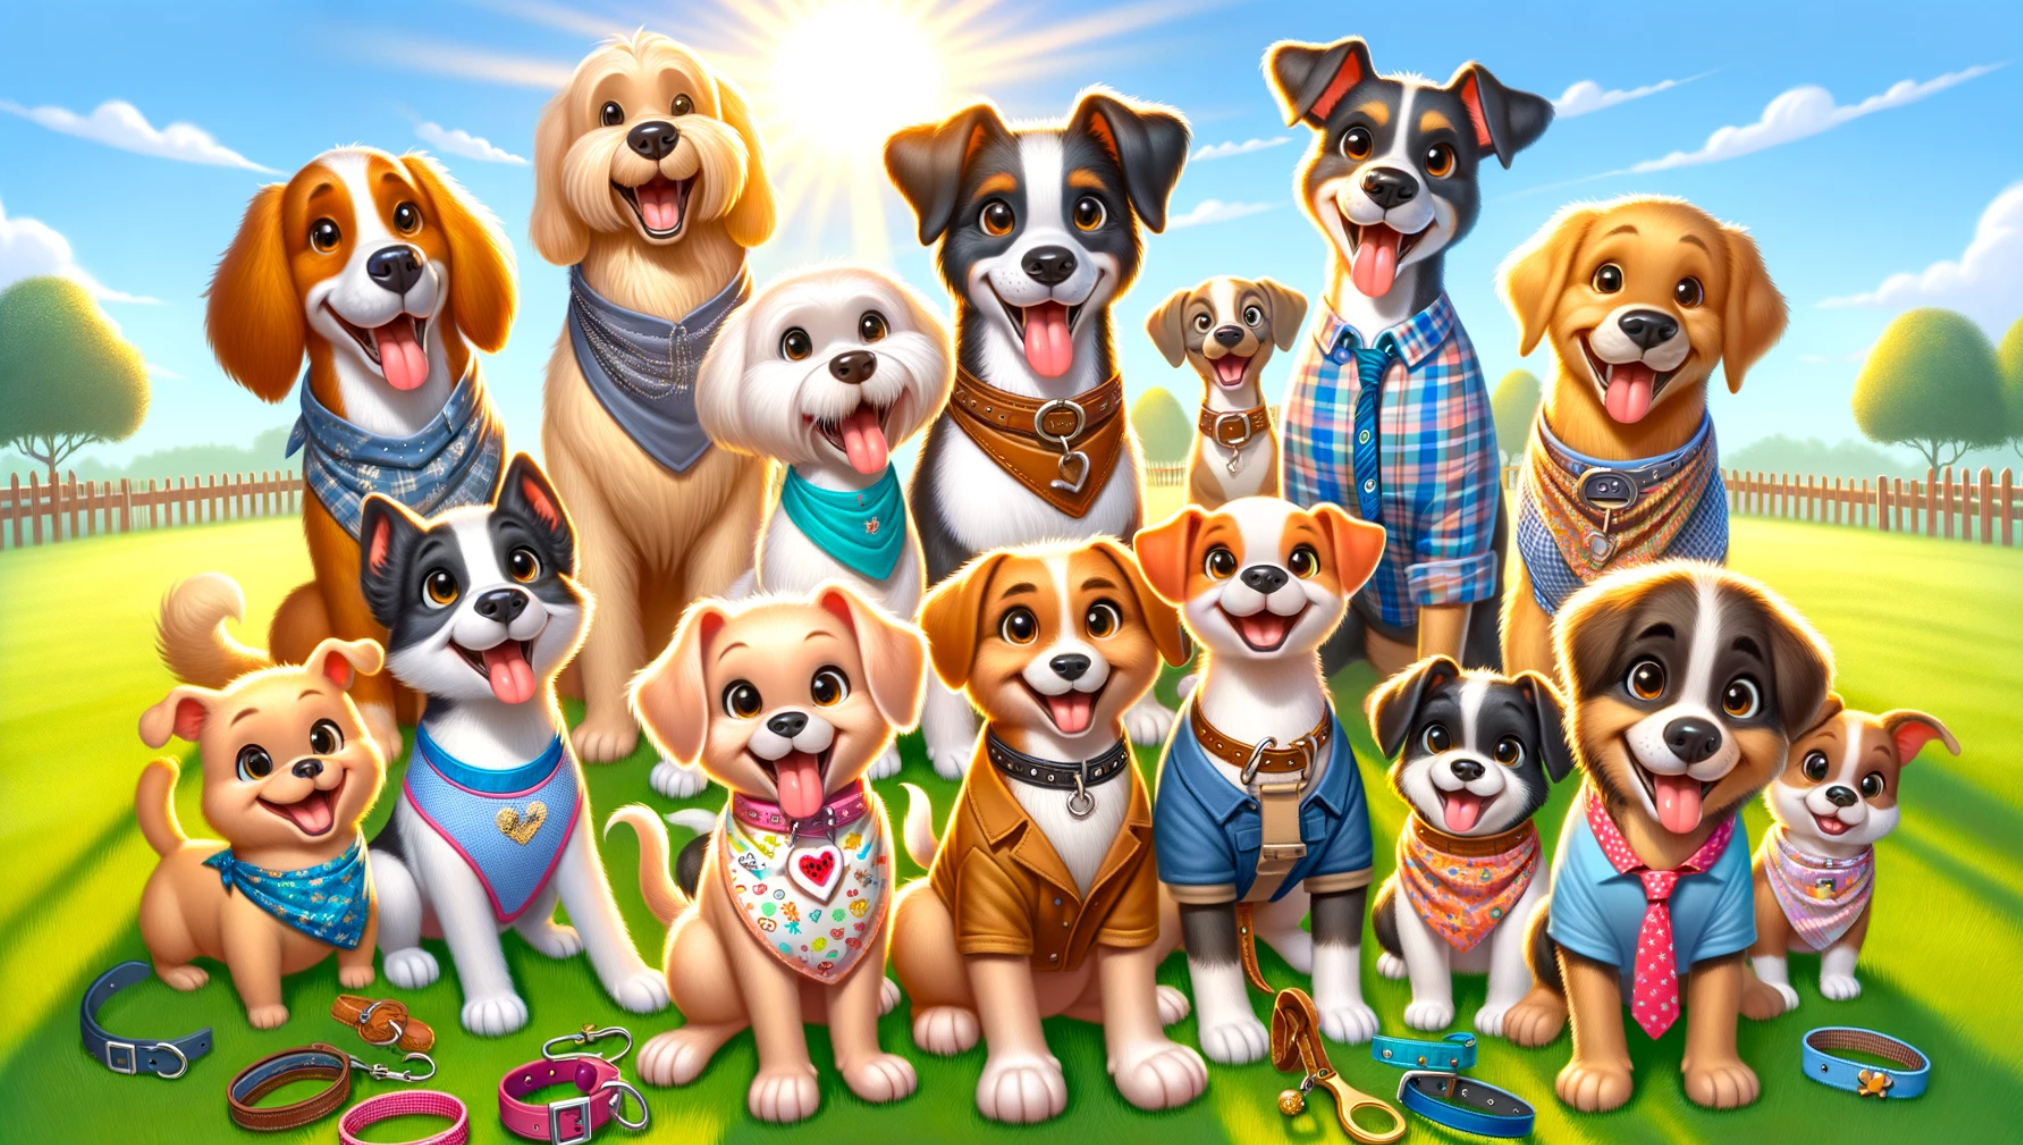 a cheerful and inviting image for your website 'Canine Heaven'. It features a variety of happy, well-groomed dogs, each adorned with stylish dog accessories, set in a sunny, grassy park.